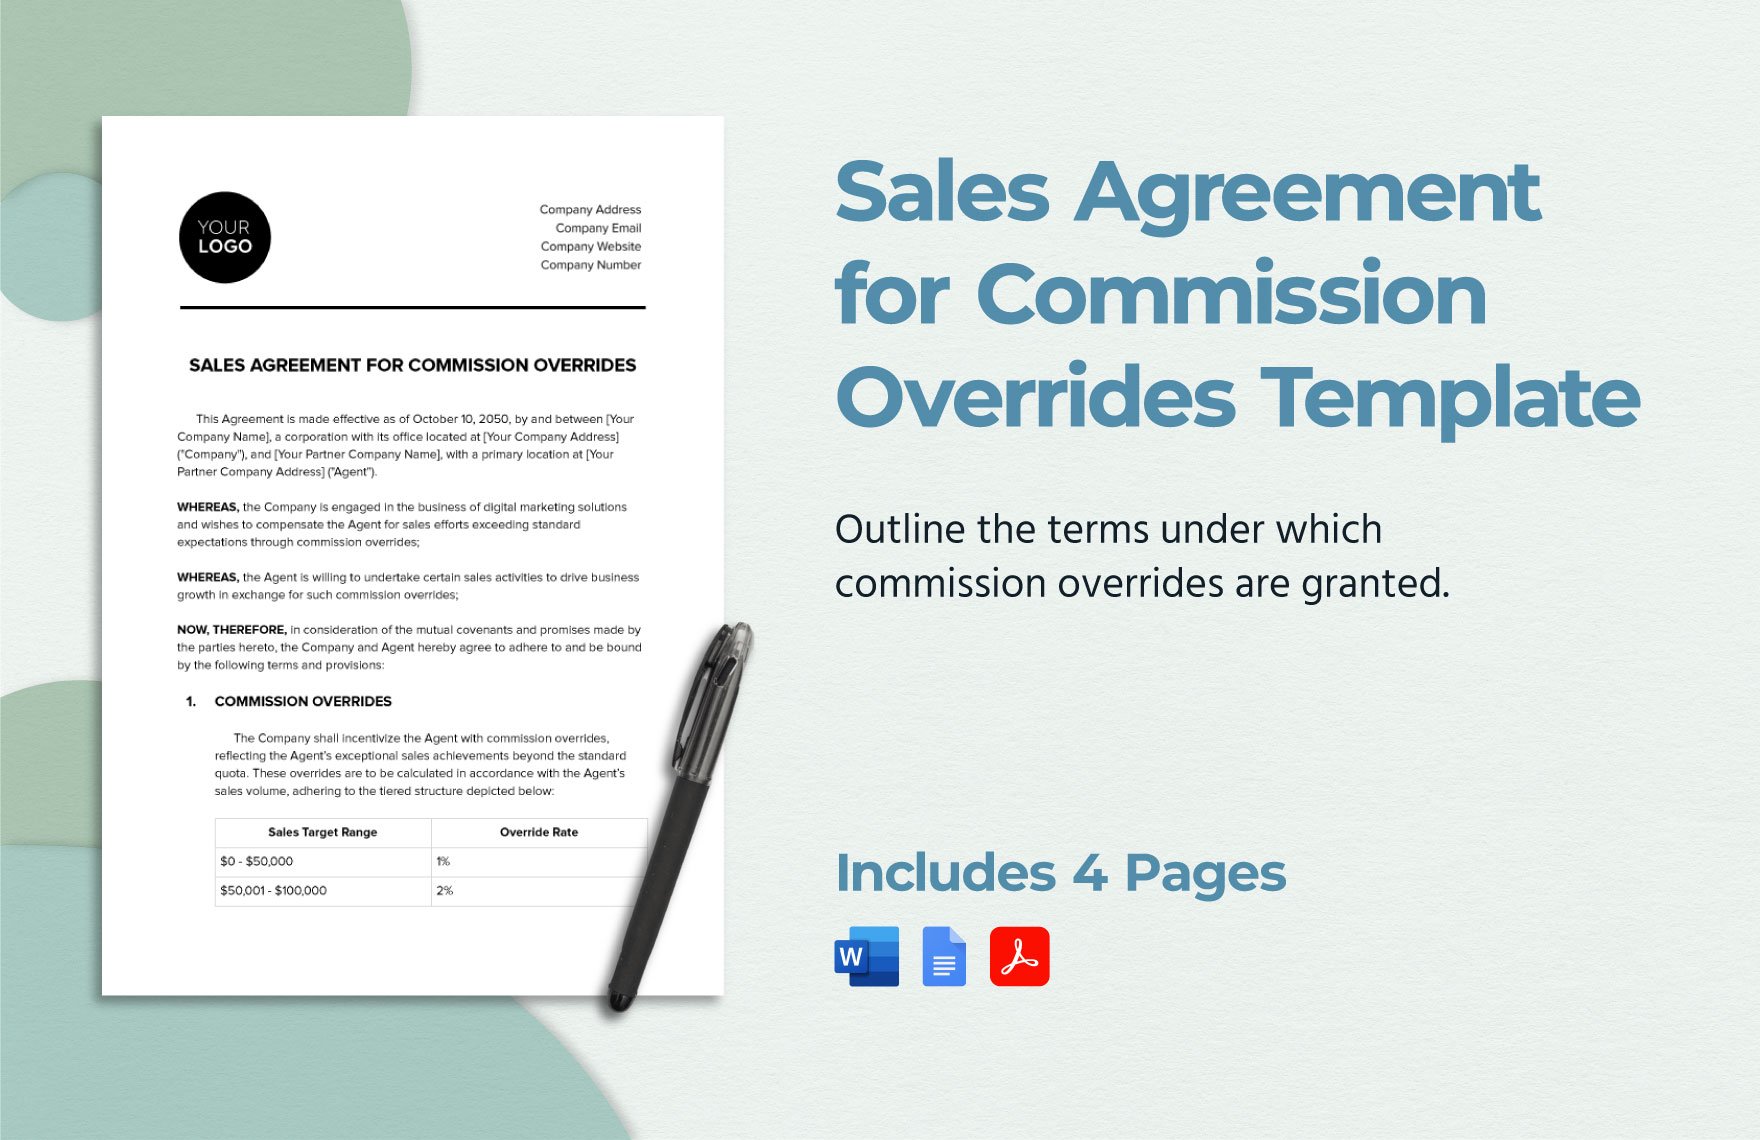 Sales Agreement for Commission Overrides Template